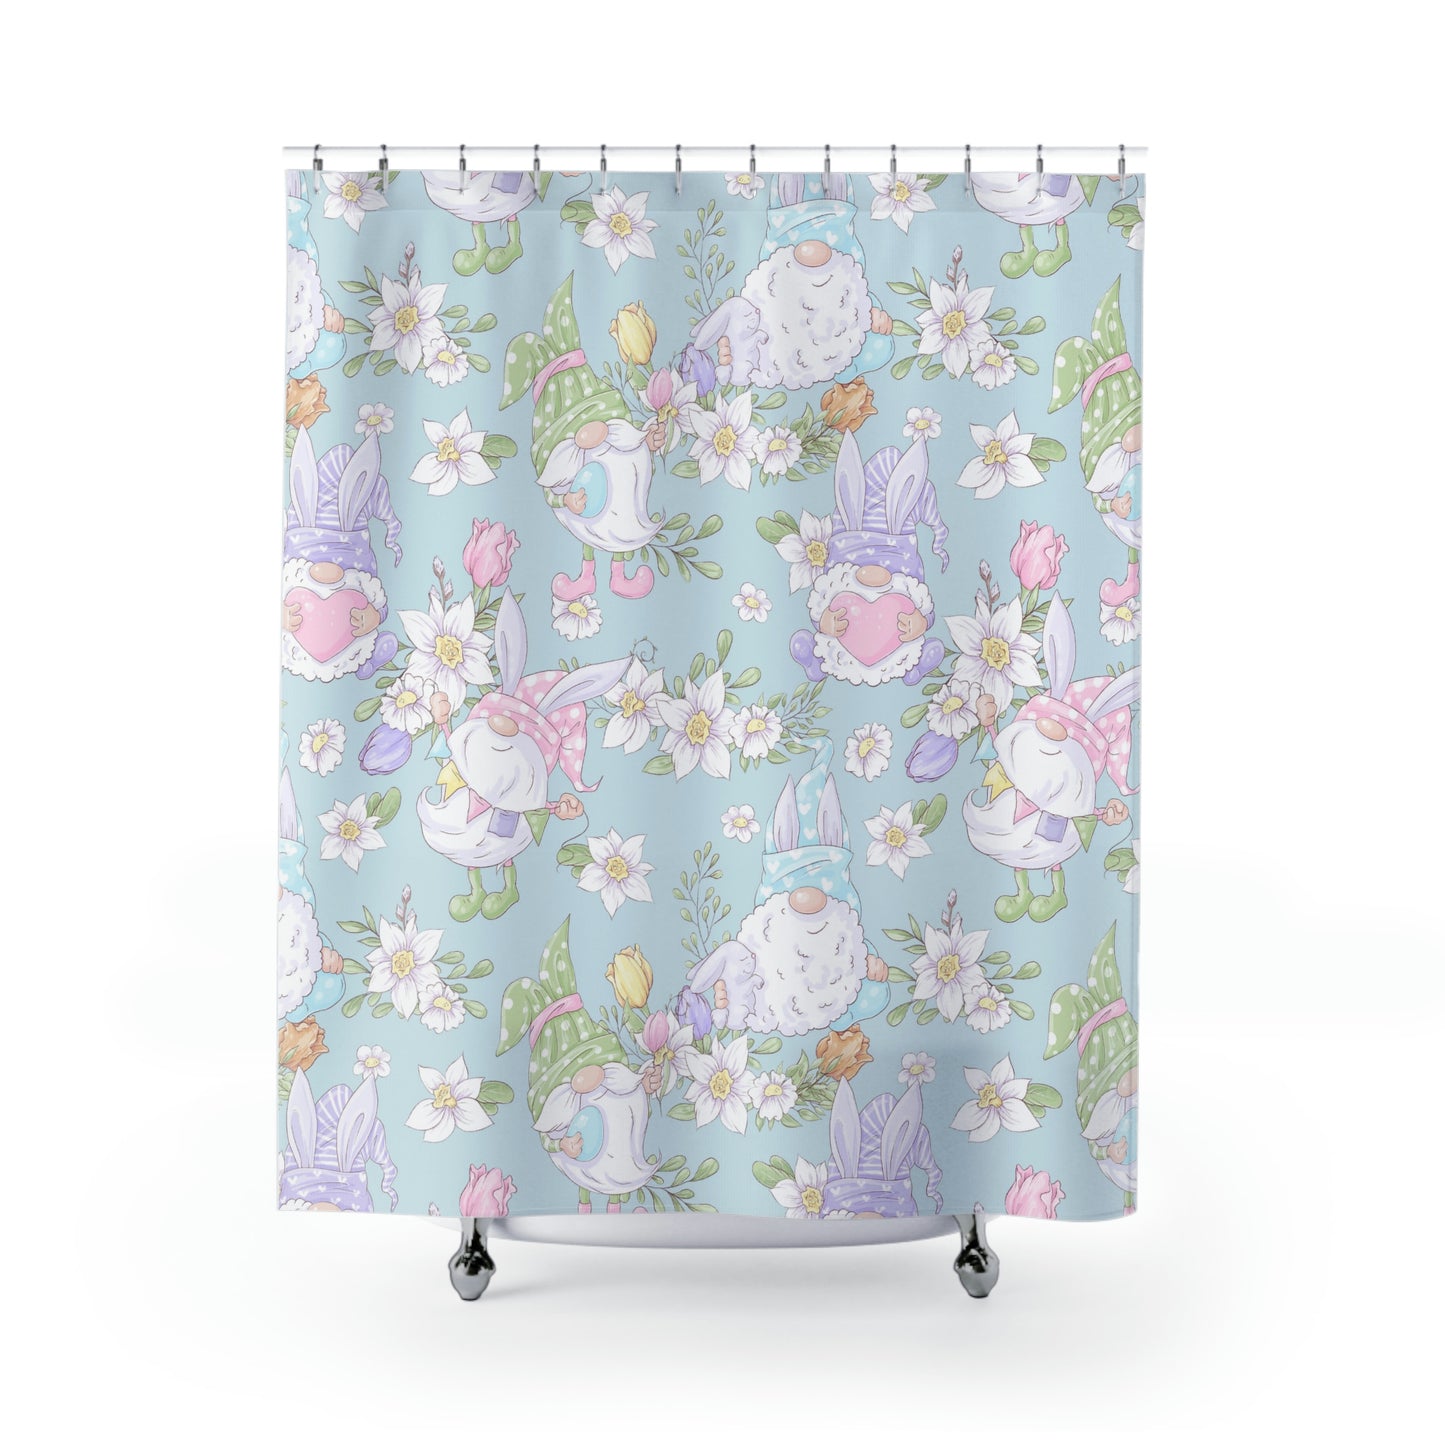 Easter Gnomes Shower Curtain